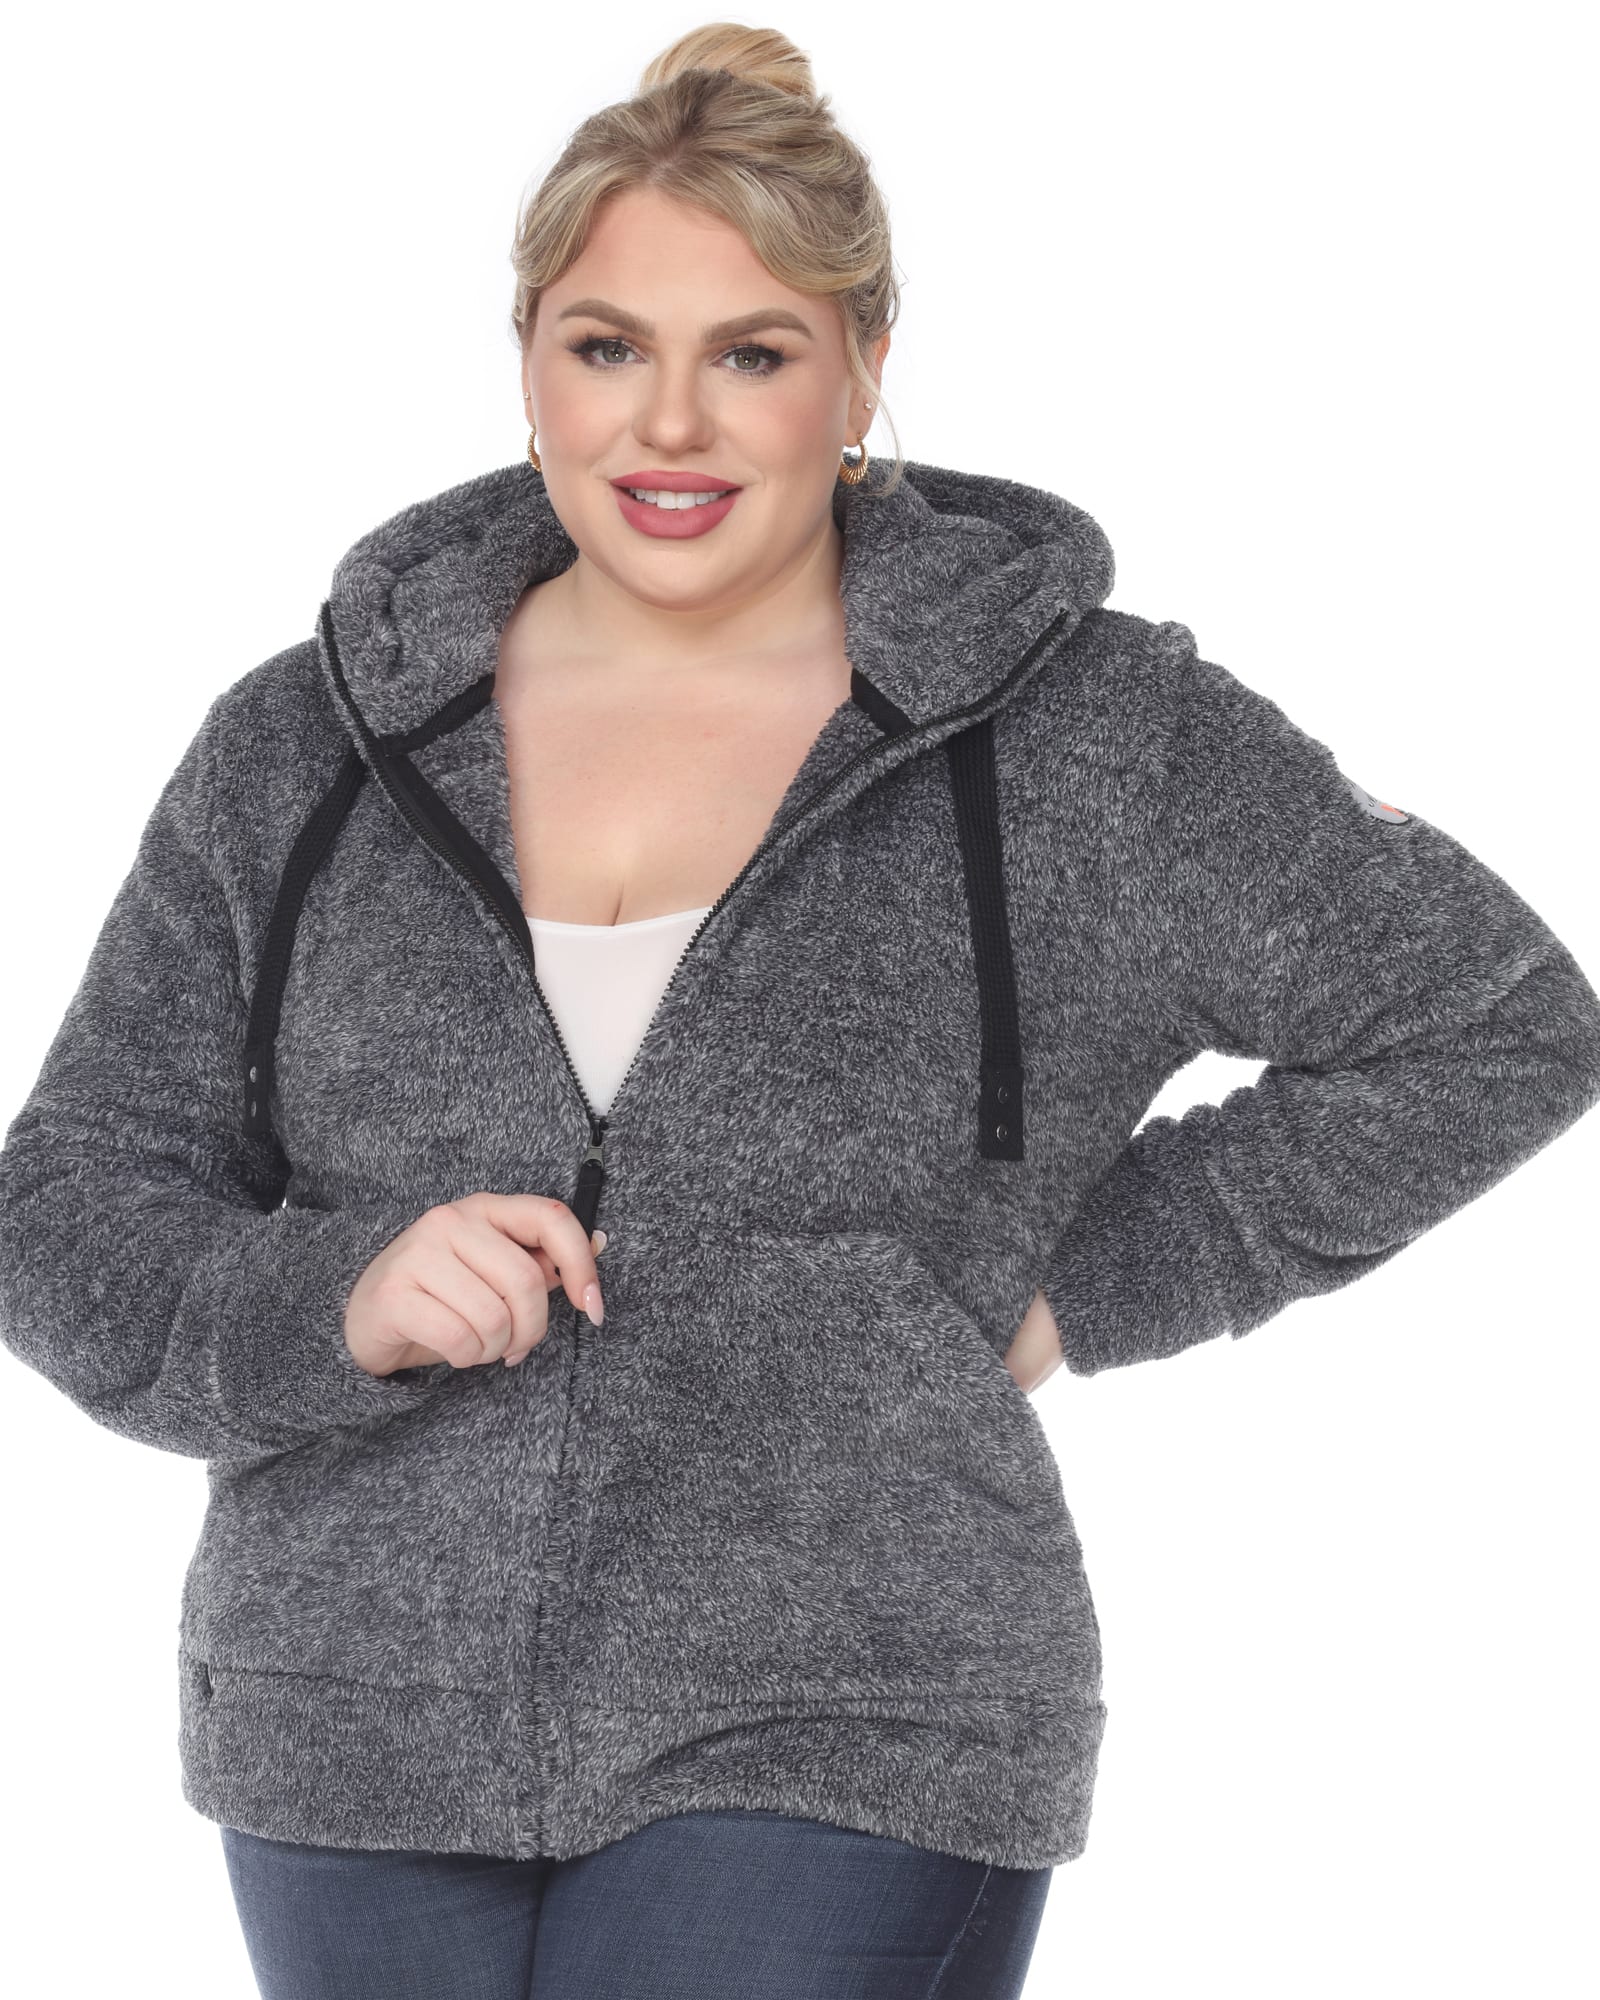 Plus Size Hoodies For Women